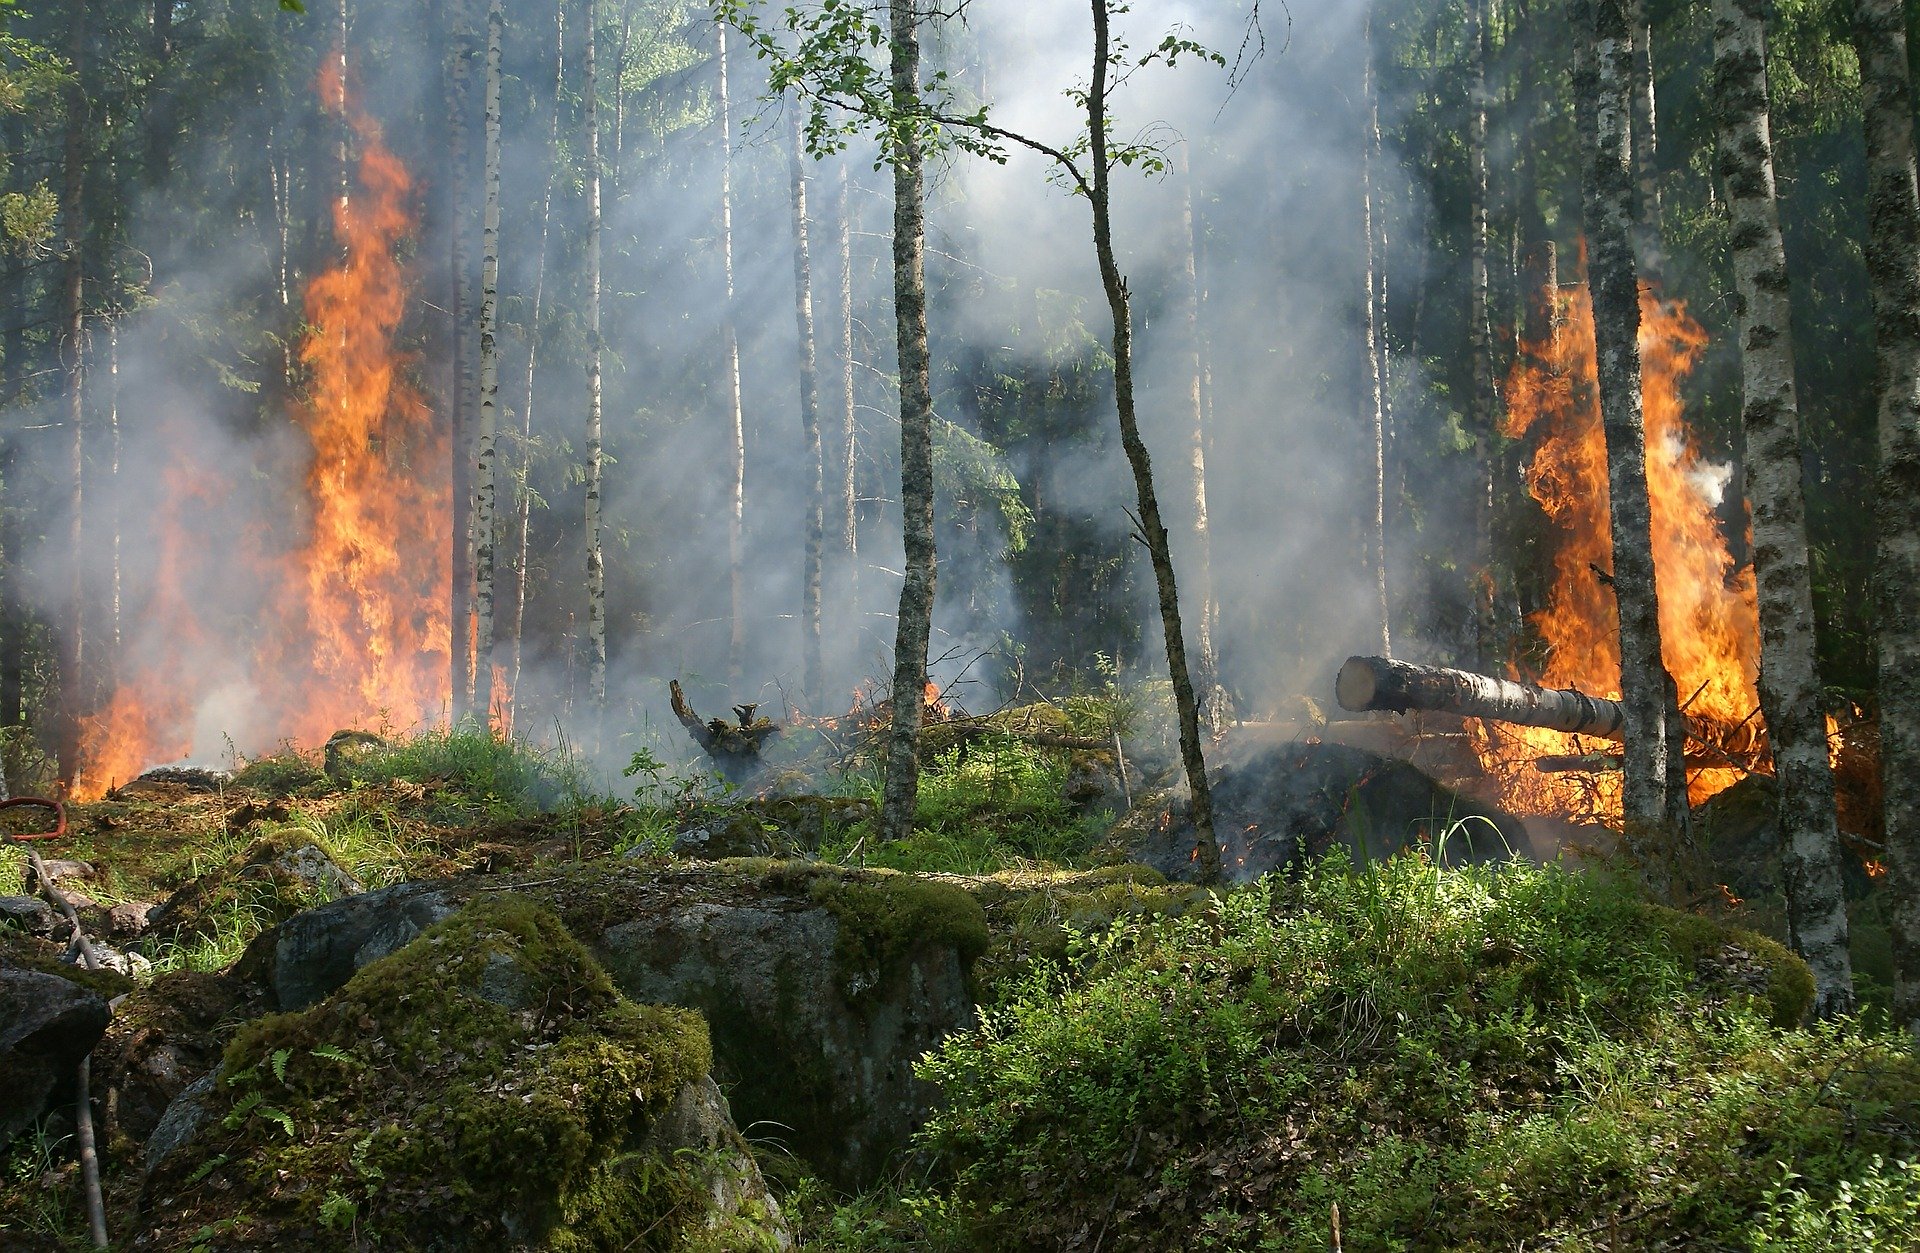 forest-fire-432870_1920